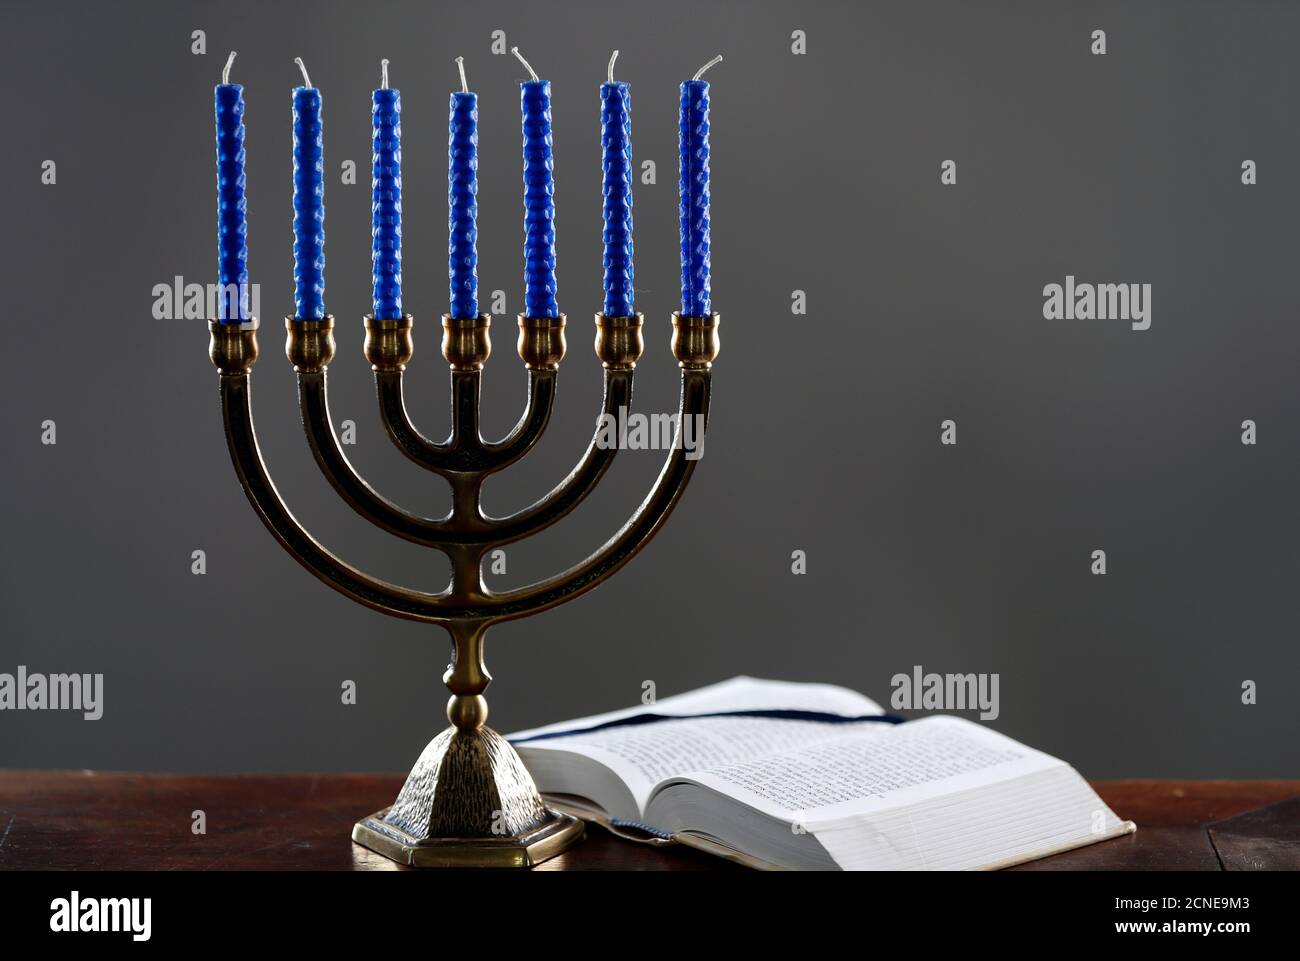 Open Torah and the Menorah (Seven-lamp Hebrew lampstand), symbol of Judaism since ancient times, France, Europe Stock Photo